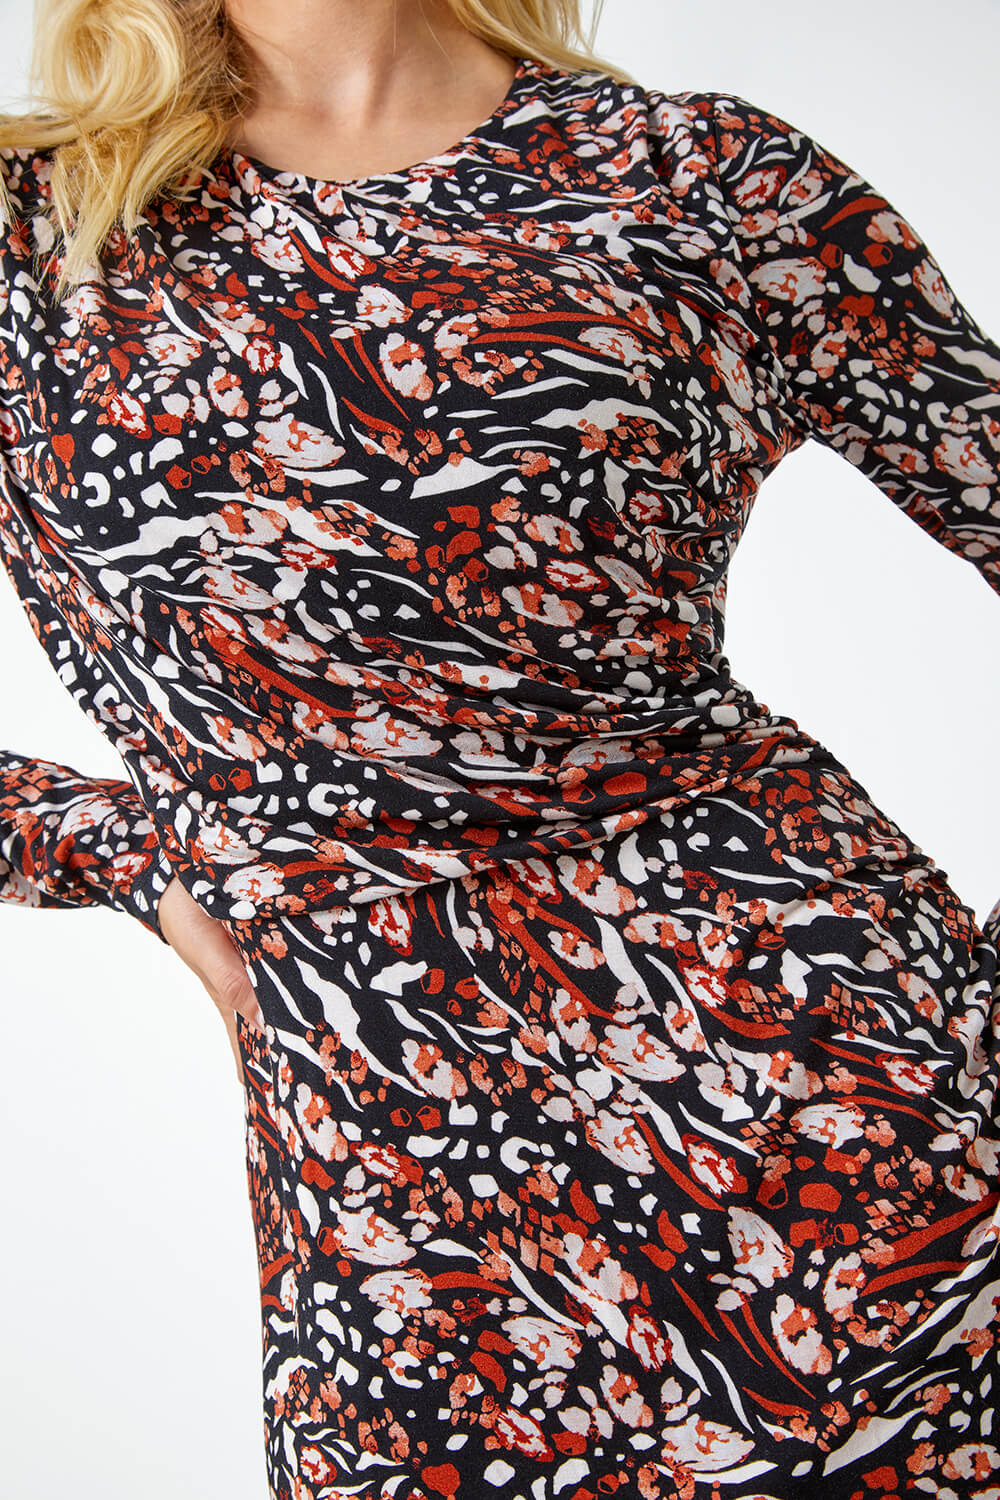 Neutral Animal Print Ruched Stretch Dress, Image 5 of 5